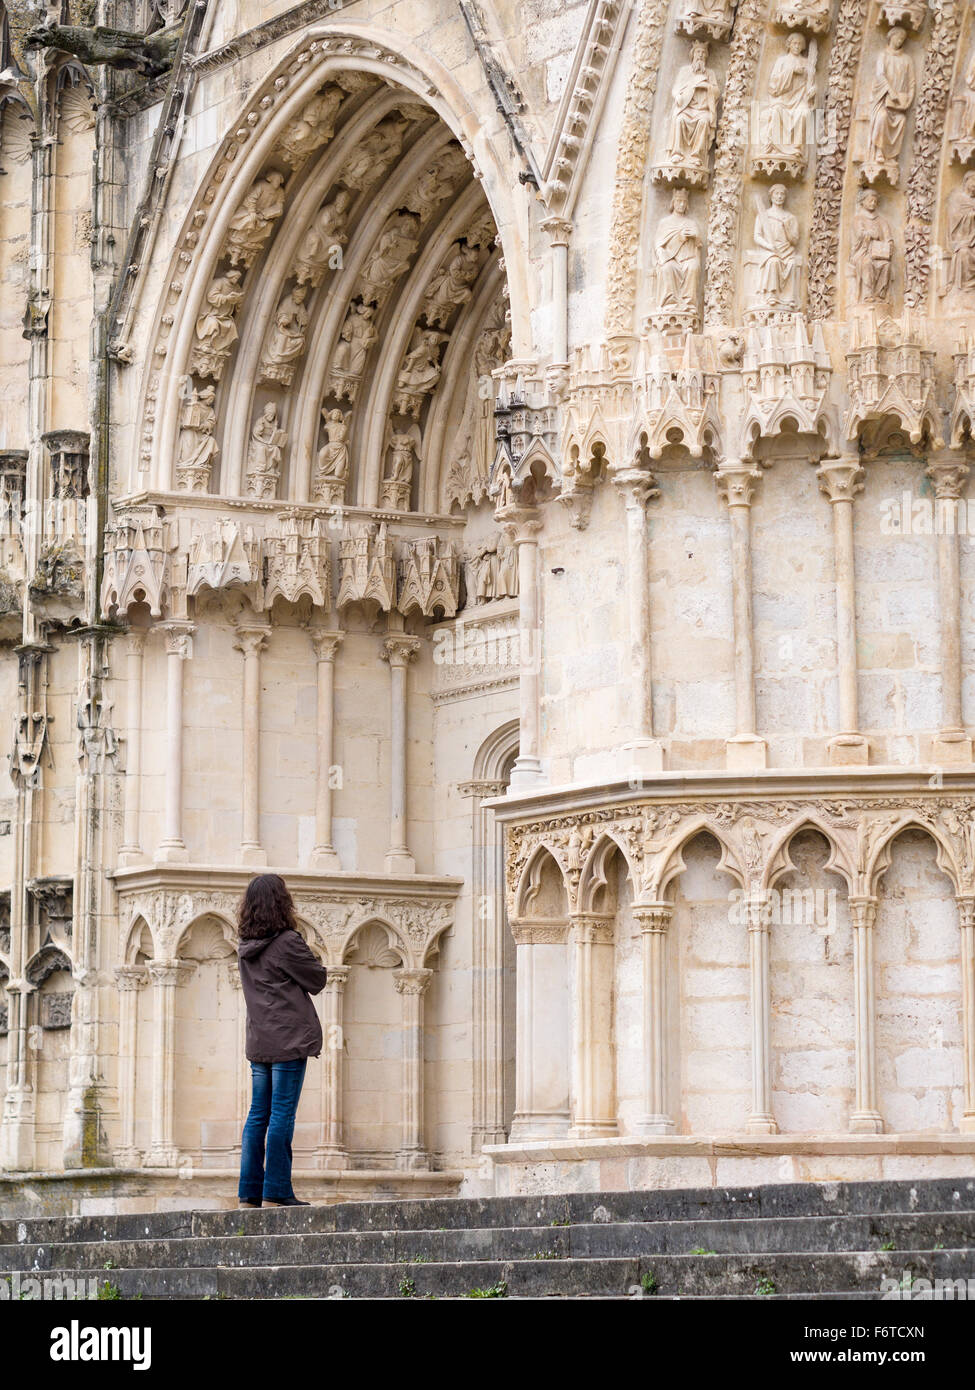 Studying the Cathedral Entrance Carvings . A woman tourist studies the carvings above a door to Bourge's Cathedral Stock Photo